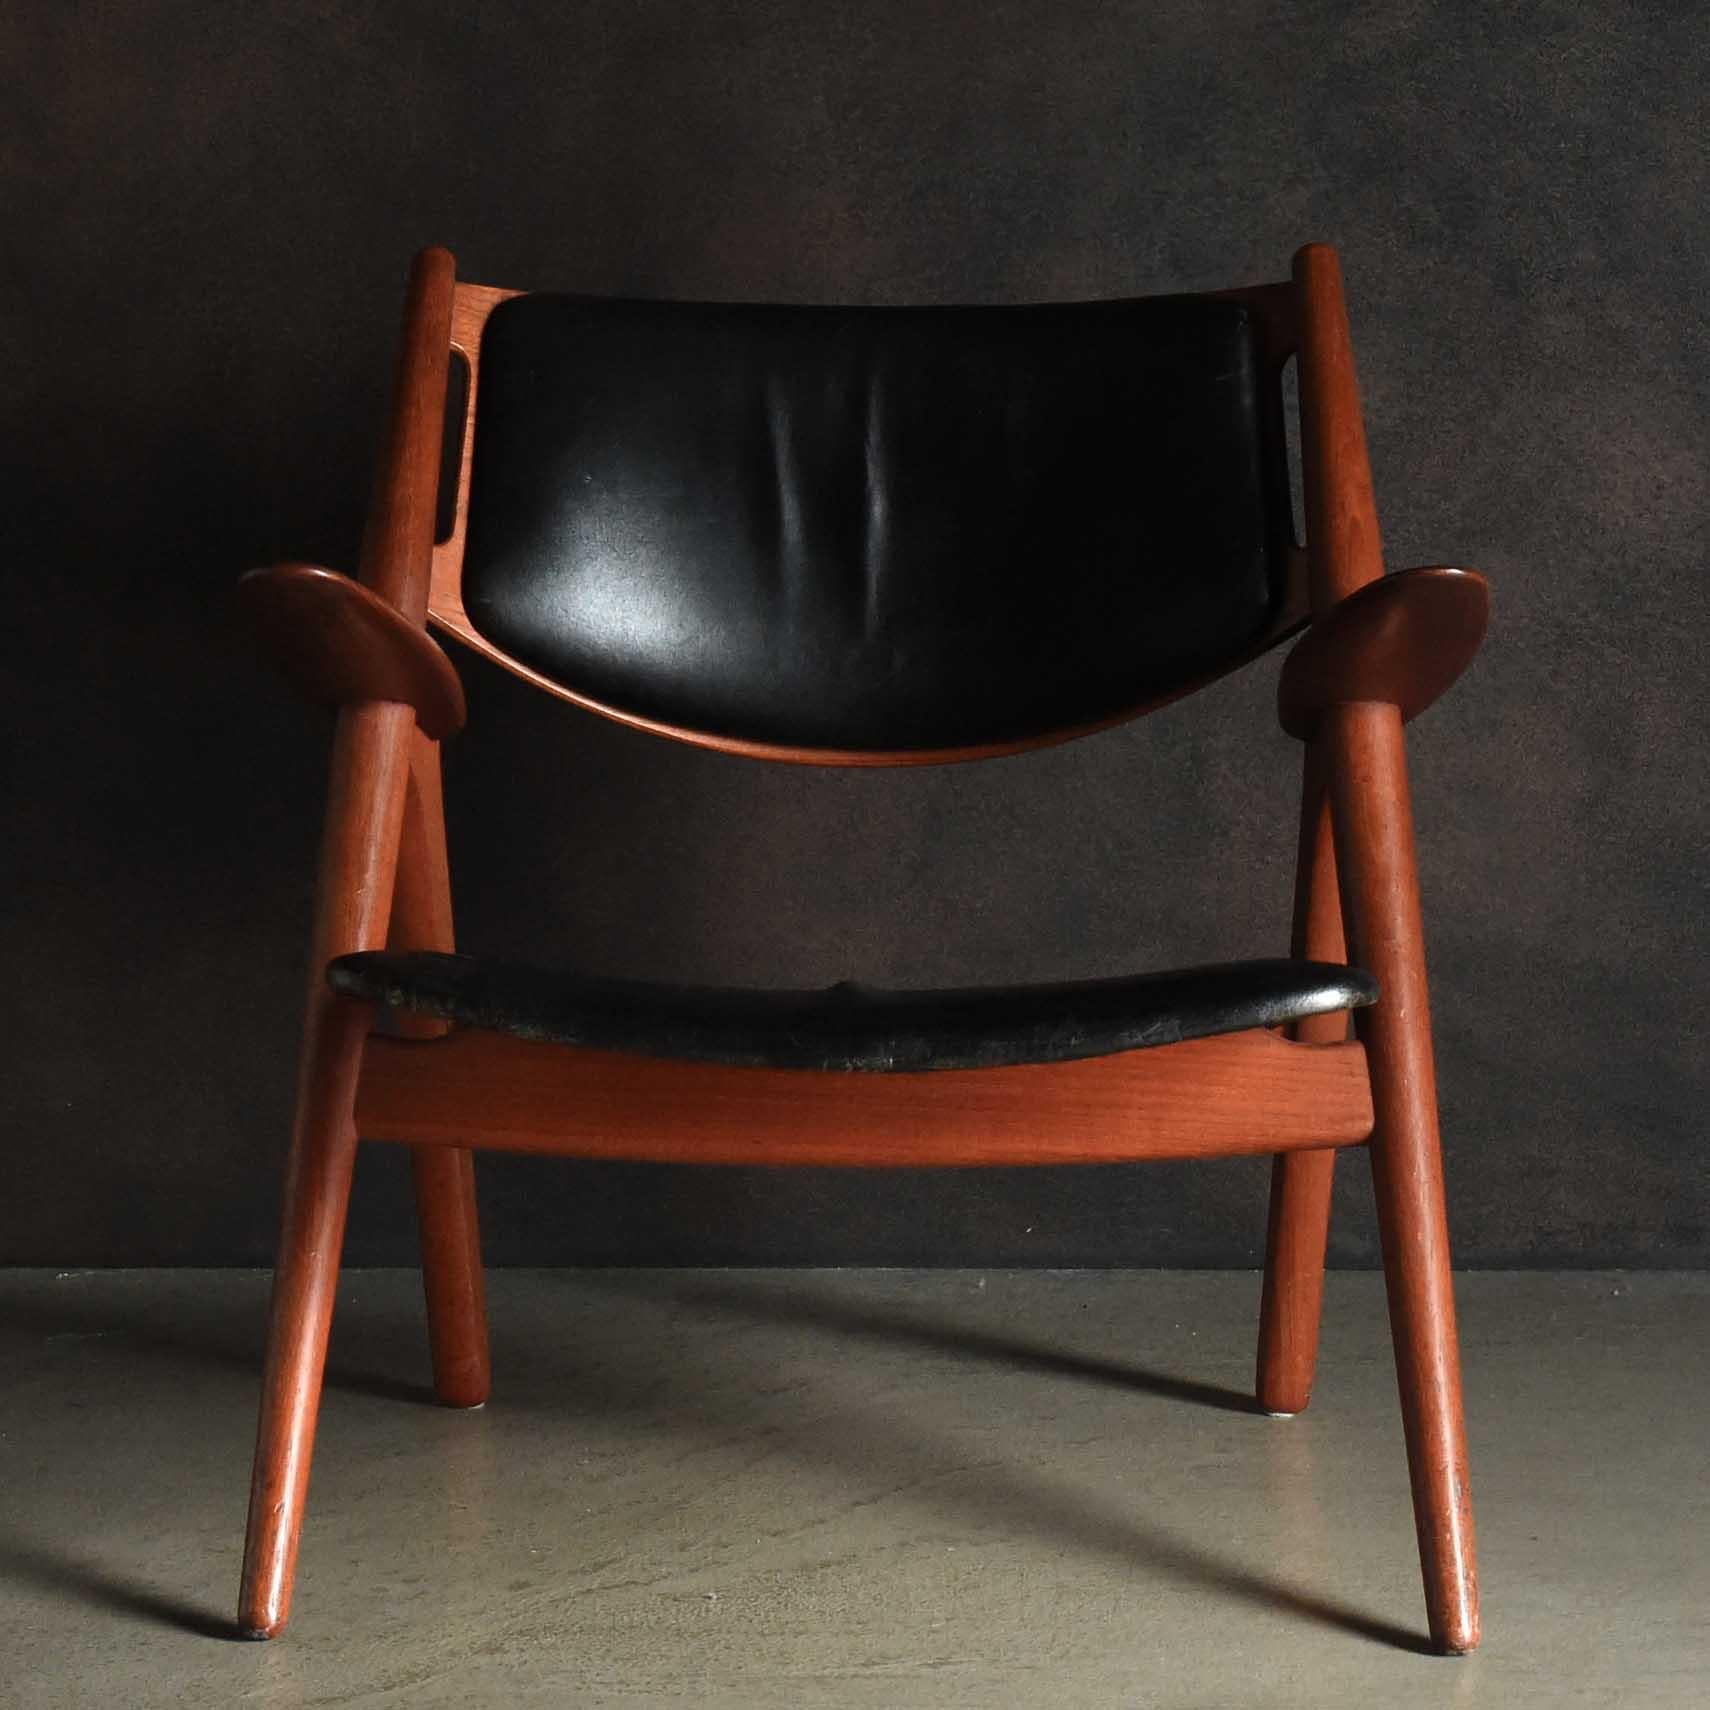 The CH28 (Sawbuck/Easy Chair) is a functional and sculptural design created by Hans J. Wegner in 1952. This exemplary piece embodies Wegner's vision of beauty and function, realized through innovative form and deliberate attention to detail. The